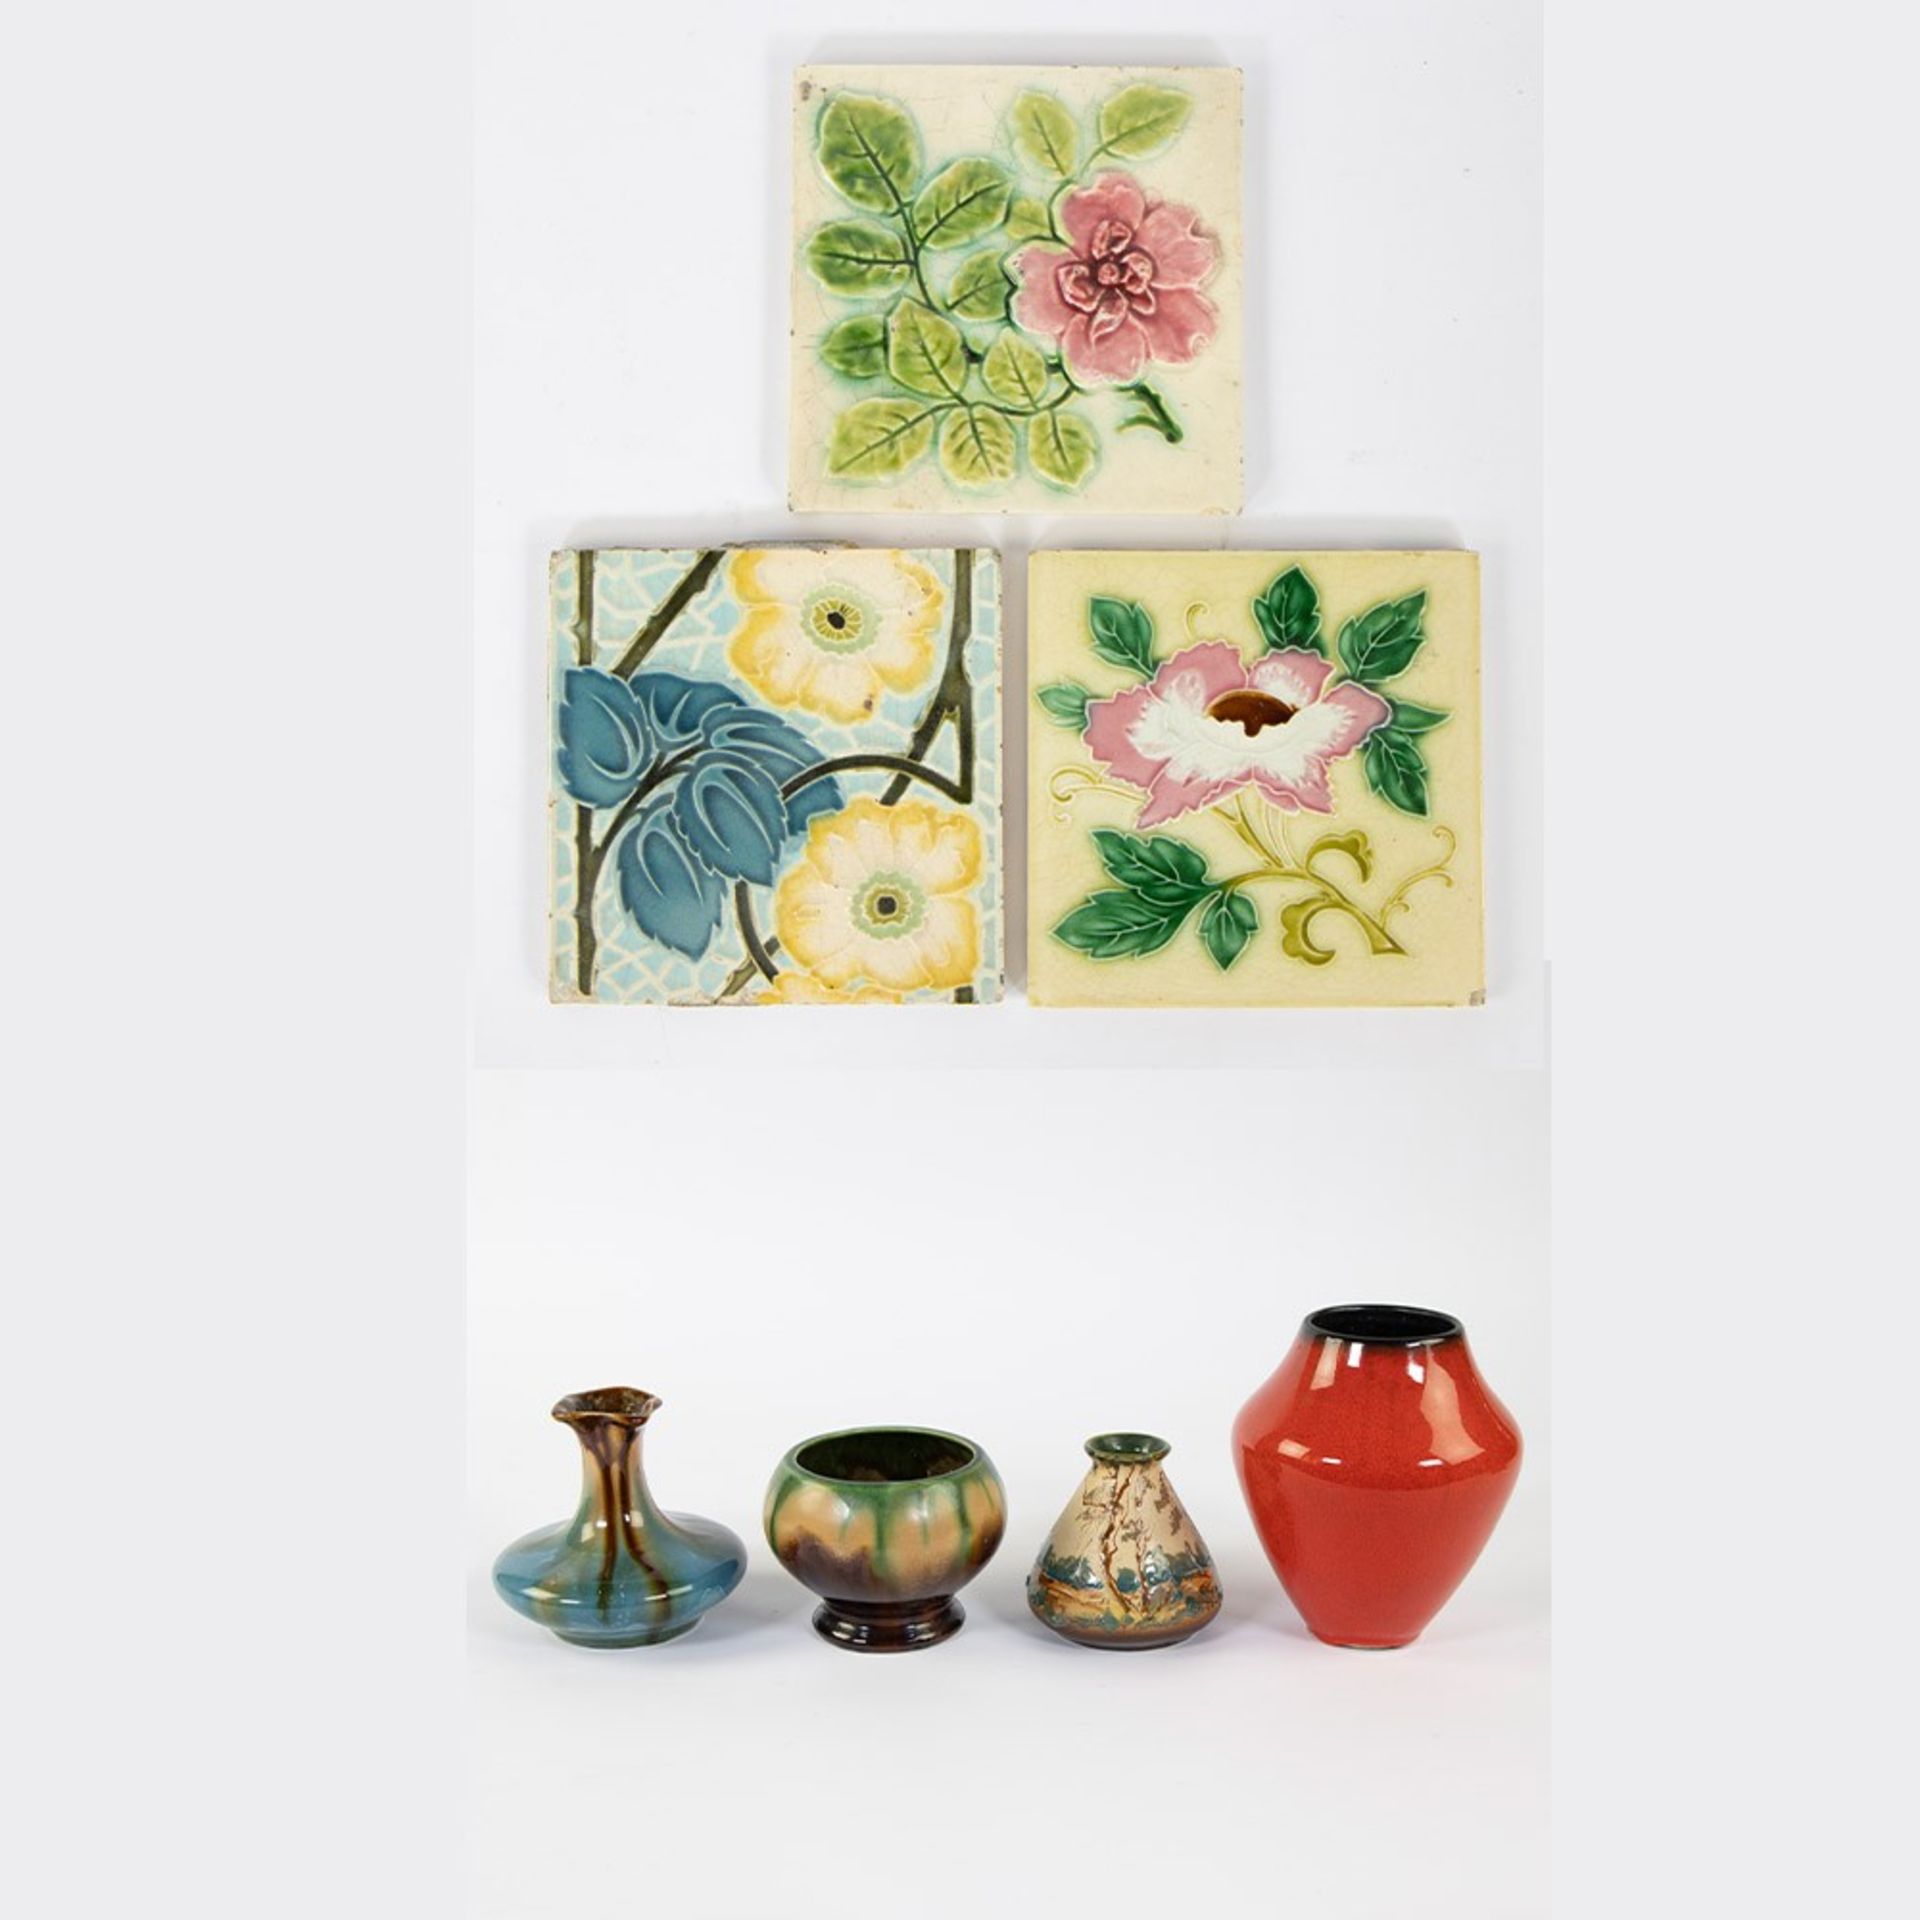 Lot Art Deco/Arts and Craft vases in earthenware and 3 Art Nouveau tiles